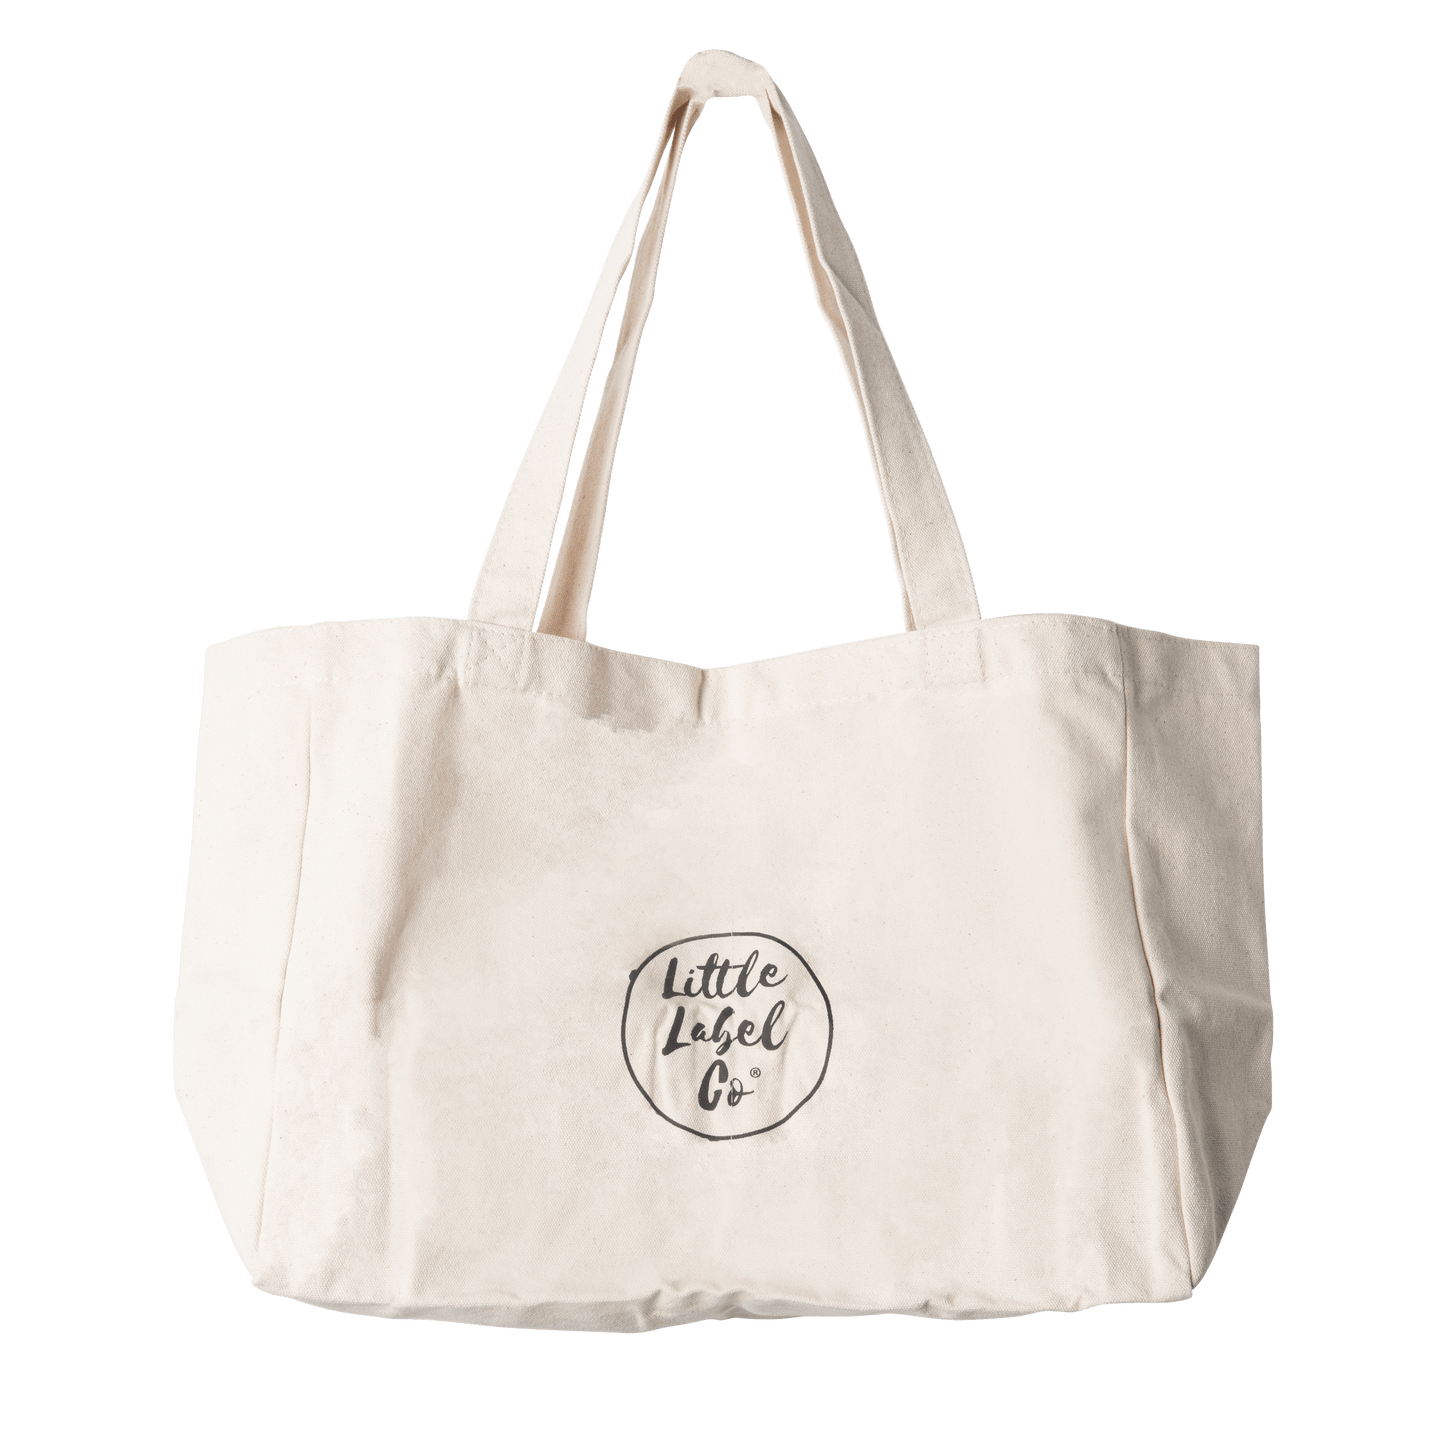 Cotton Tote with Dividers - Little Label Co - Lunch Boxes & Totes - 60%, Catchoftheday